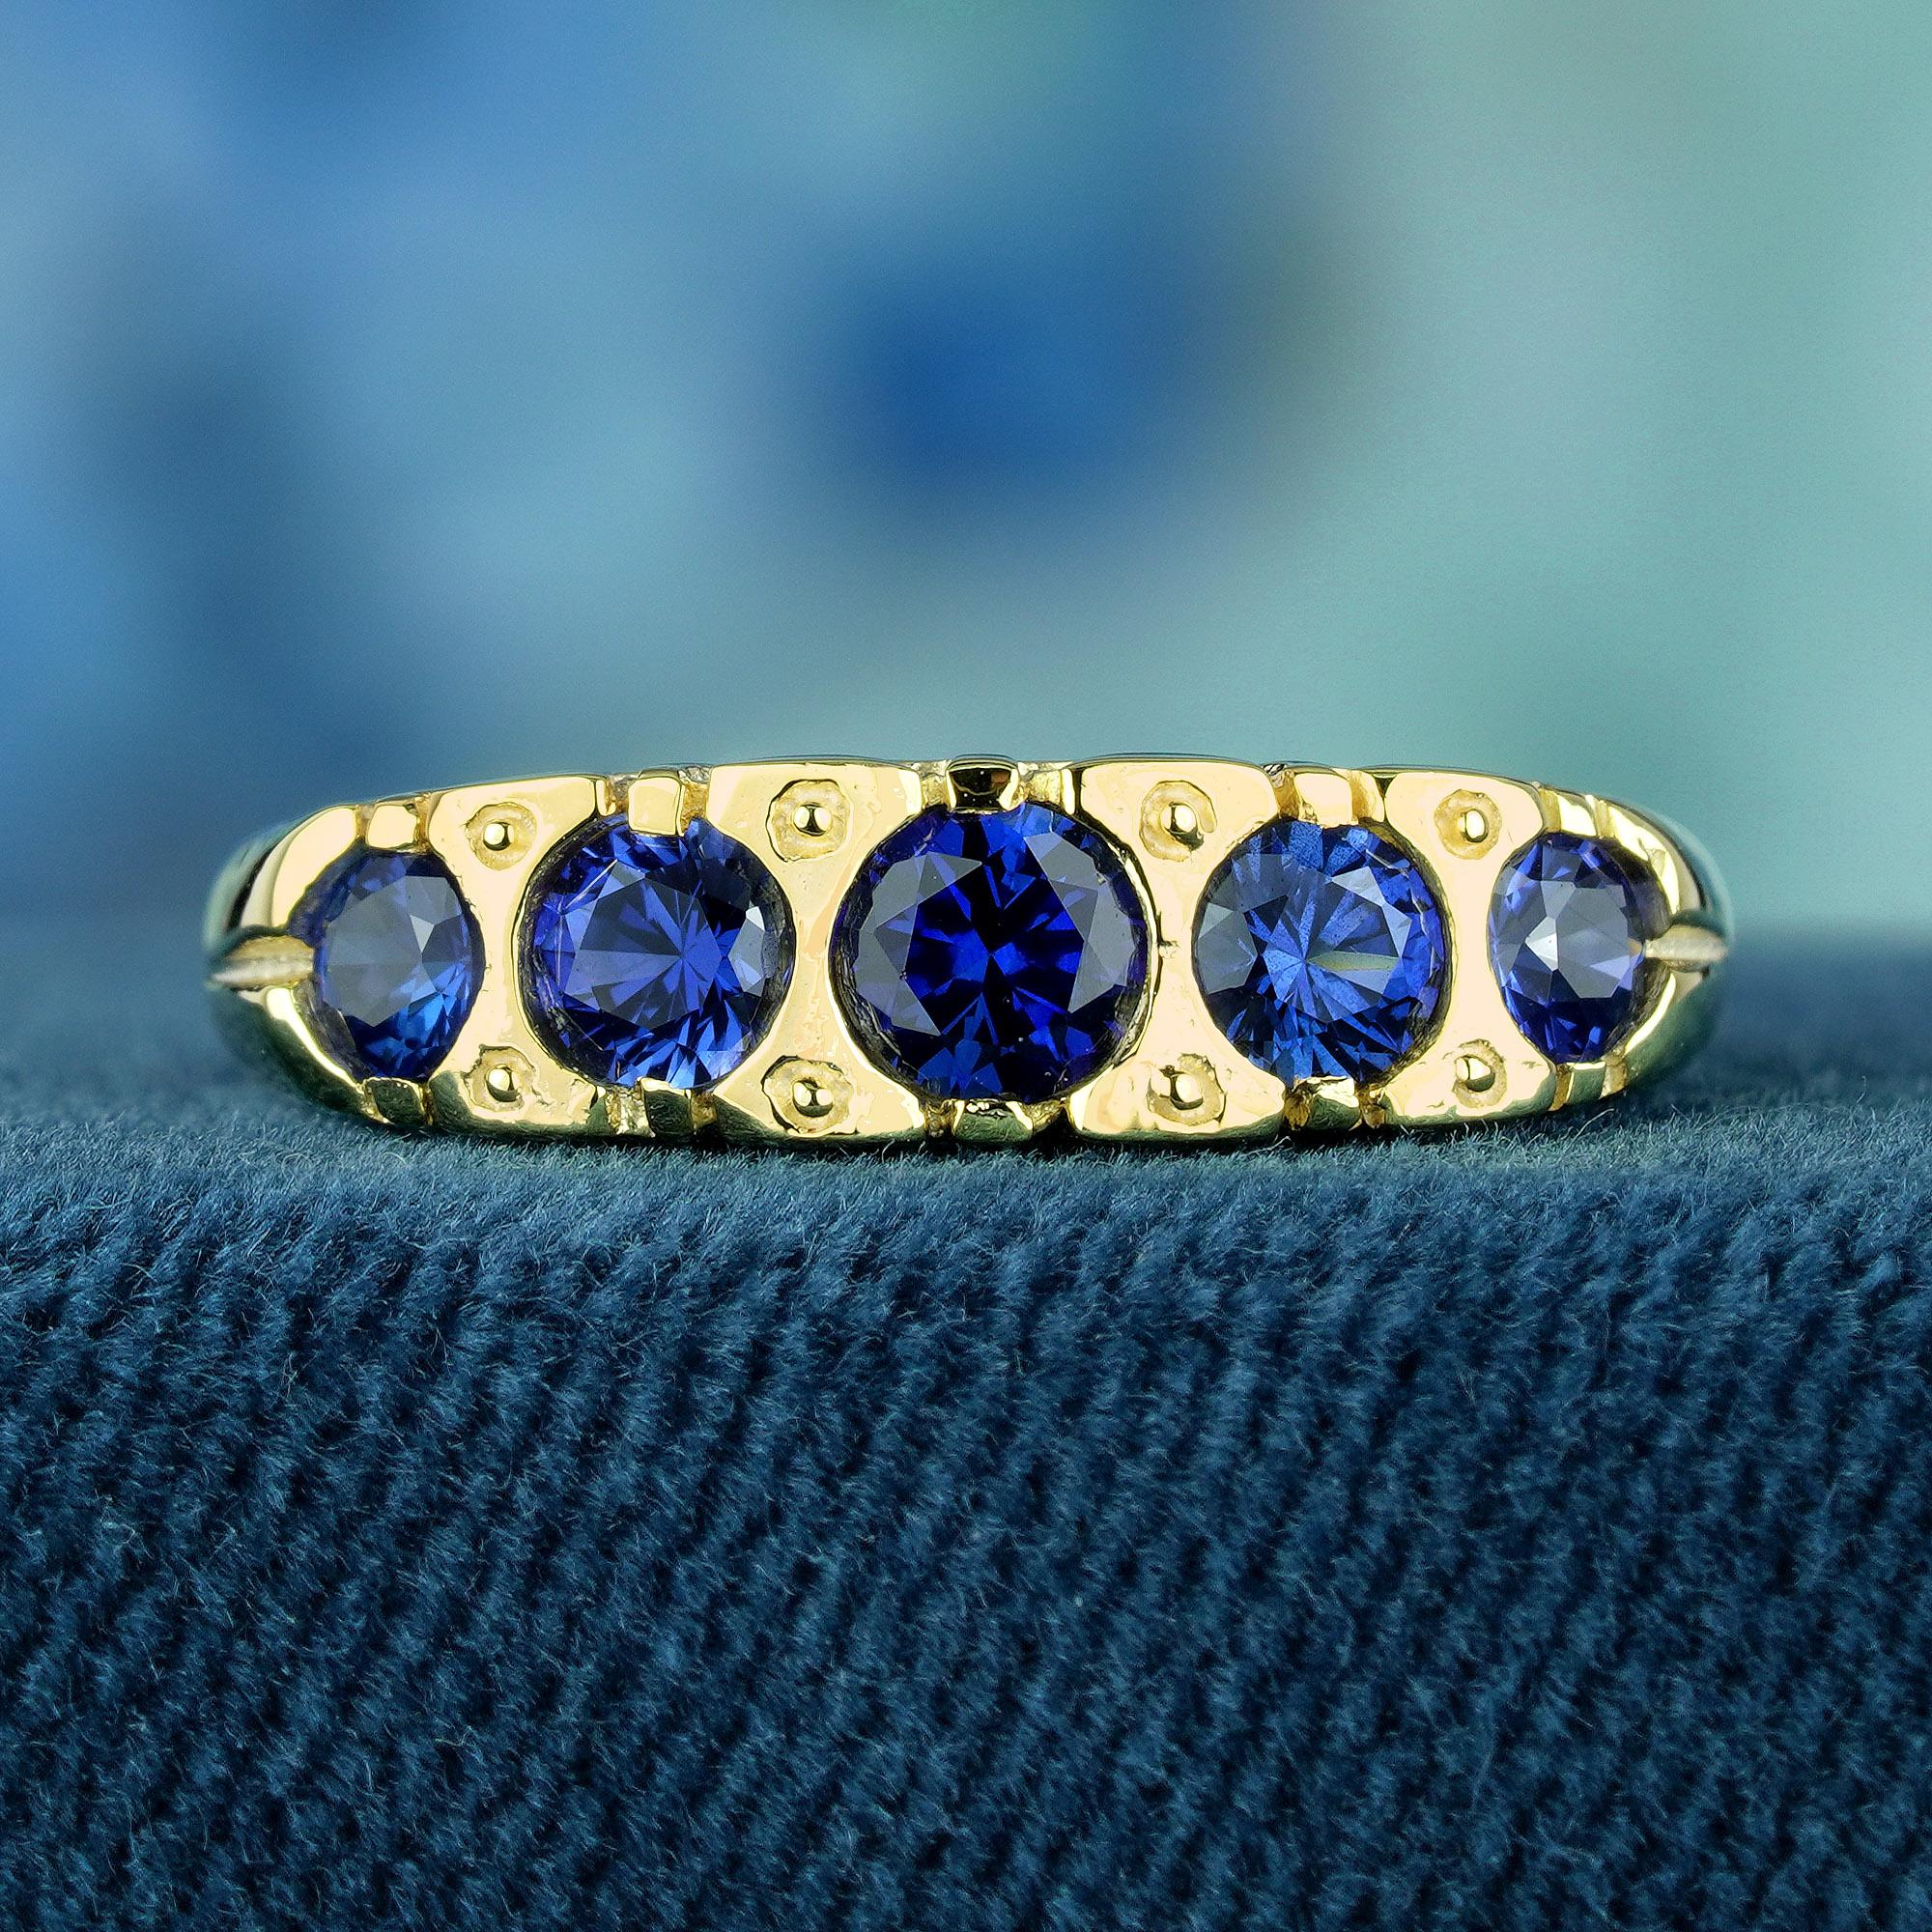 This exquisite vintage-inspired ring embellished with round, natural blue sapphires, resting upon a sleek and lustrous yellow gold band. The ring's delicate five-stone setting whispers of vintage glamour, while the polished yellow gold band adds a